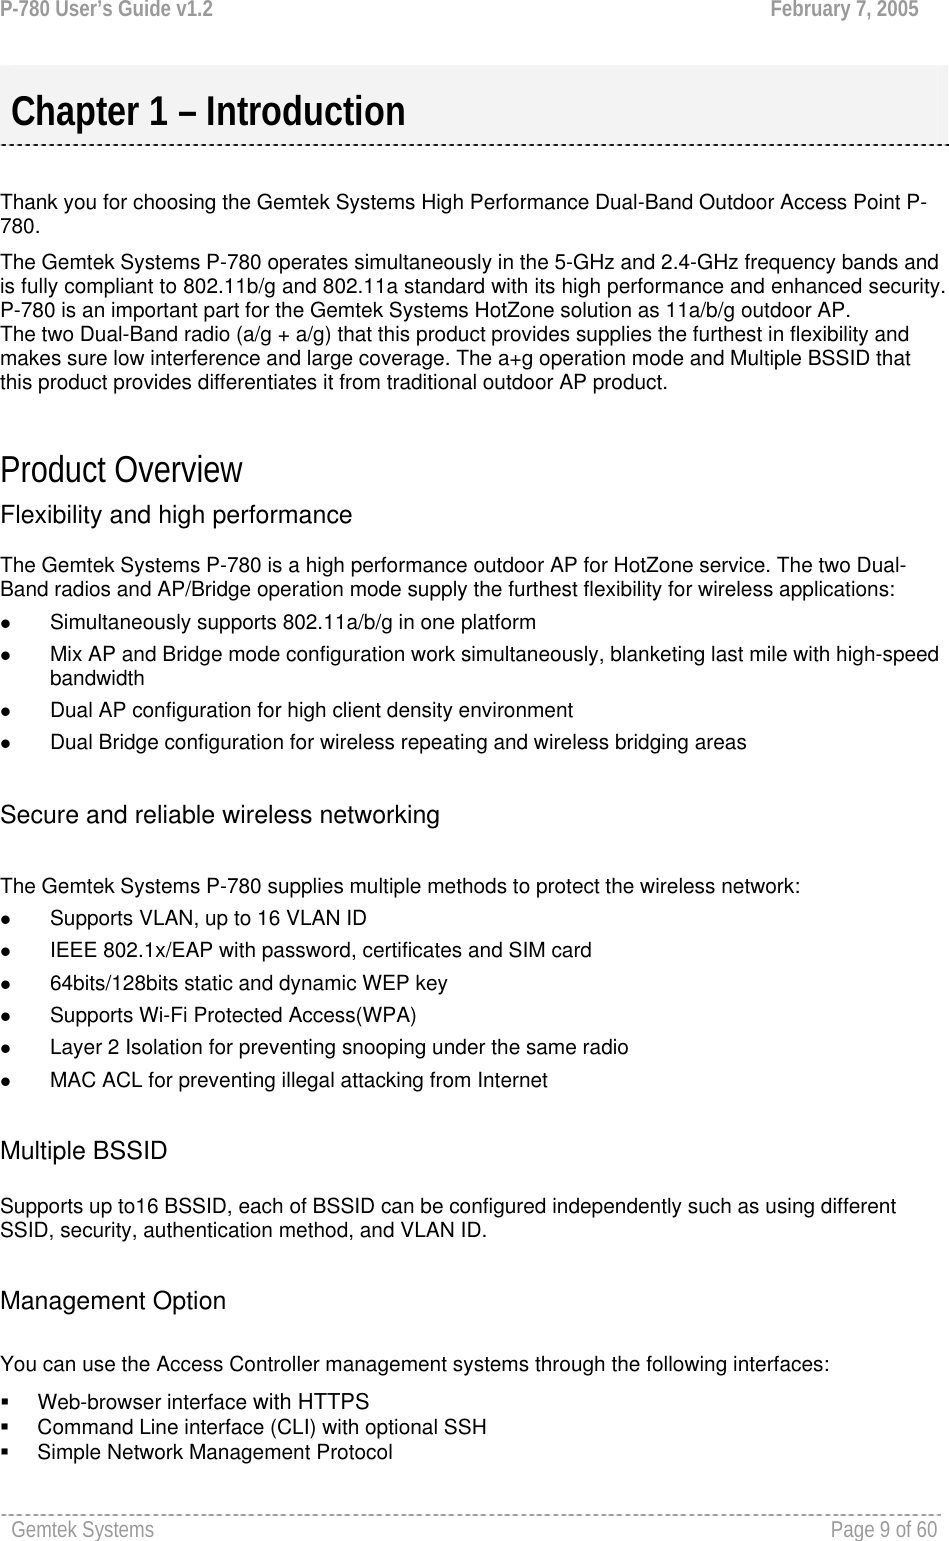 P-780 User’s Guide v1.2  February 7, 2005 Gemtek Systems    Page 9 of 60    Thank you for choosing the Gemtek Systems High Performance Dual-Band Outdoor Access Point P-780. The Gemtek Systems P-780 operates simultaneously in the 5-GHz and 2.4-GHz frequency bands and is fully compliant to 802.11b/g and 802.11a standard with its high performance and enhanced security. P-780 is an important part for the Gemtek Systems HotZone solution as 11a/b/g outdoor AP.  The two Dual-Band radio (a/g + a/g) that this product provides supplies the furthest in flexibility and makes sure low interference and large coverage. The a+g operation mode and Multiple BSSID that this product provides differentiates it from traditional outdoor AP product.  Product Overview Flexibility and high performance  The Gemtek Systems P-780 is a high performance outdoor AP for HotZone service. The two Dual-Band radios and AP/Bridge operation mode supply the furthest flexibility for wireless applications: z Simultaneously supports 802.11a/b/g in one platform z Mix AP and Bridge mode configuration work simultaneously, blanketing last mile with high-speed bandwidth z Dual AP configuration for high client density environment z Dual Bridge configuration for wireless repeating and wireless bridging areas  Secure and reliable wireless networking  The Gemtek Systems P-780 supplies multiple methods to protect the wireless network:  z Supports VLAN, up to 16 VLAN ID z IEEE 802.1x/EAP with password, certificates and SIM card z 64bits/128bits static and dynamic WEP key  z Supports Wi-Fi Protected Access(WPA) z Layer 2 Isolation for preventing snooping under the same radio z MAC ACL for preventing illegal attacking from Internet  Multiple BSSID  Supports up to16 BSSID, each of BSSID can be configured independently such as using different SSID, security, authentication method, and VLAN ID.   Management Option  You can use the Access Controller management systems through the following interfaces:  Web-browser interface with HTTPS   Command Line interface (CLI) with optional SSH   Simple Network Management Protocol Chapter 1 – Introduction 